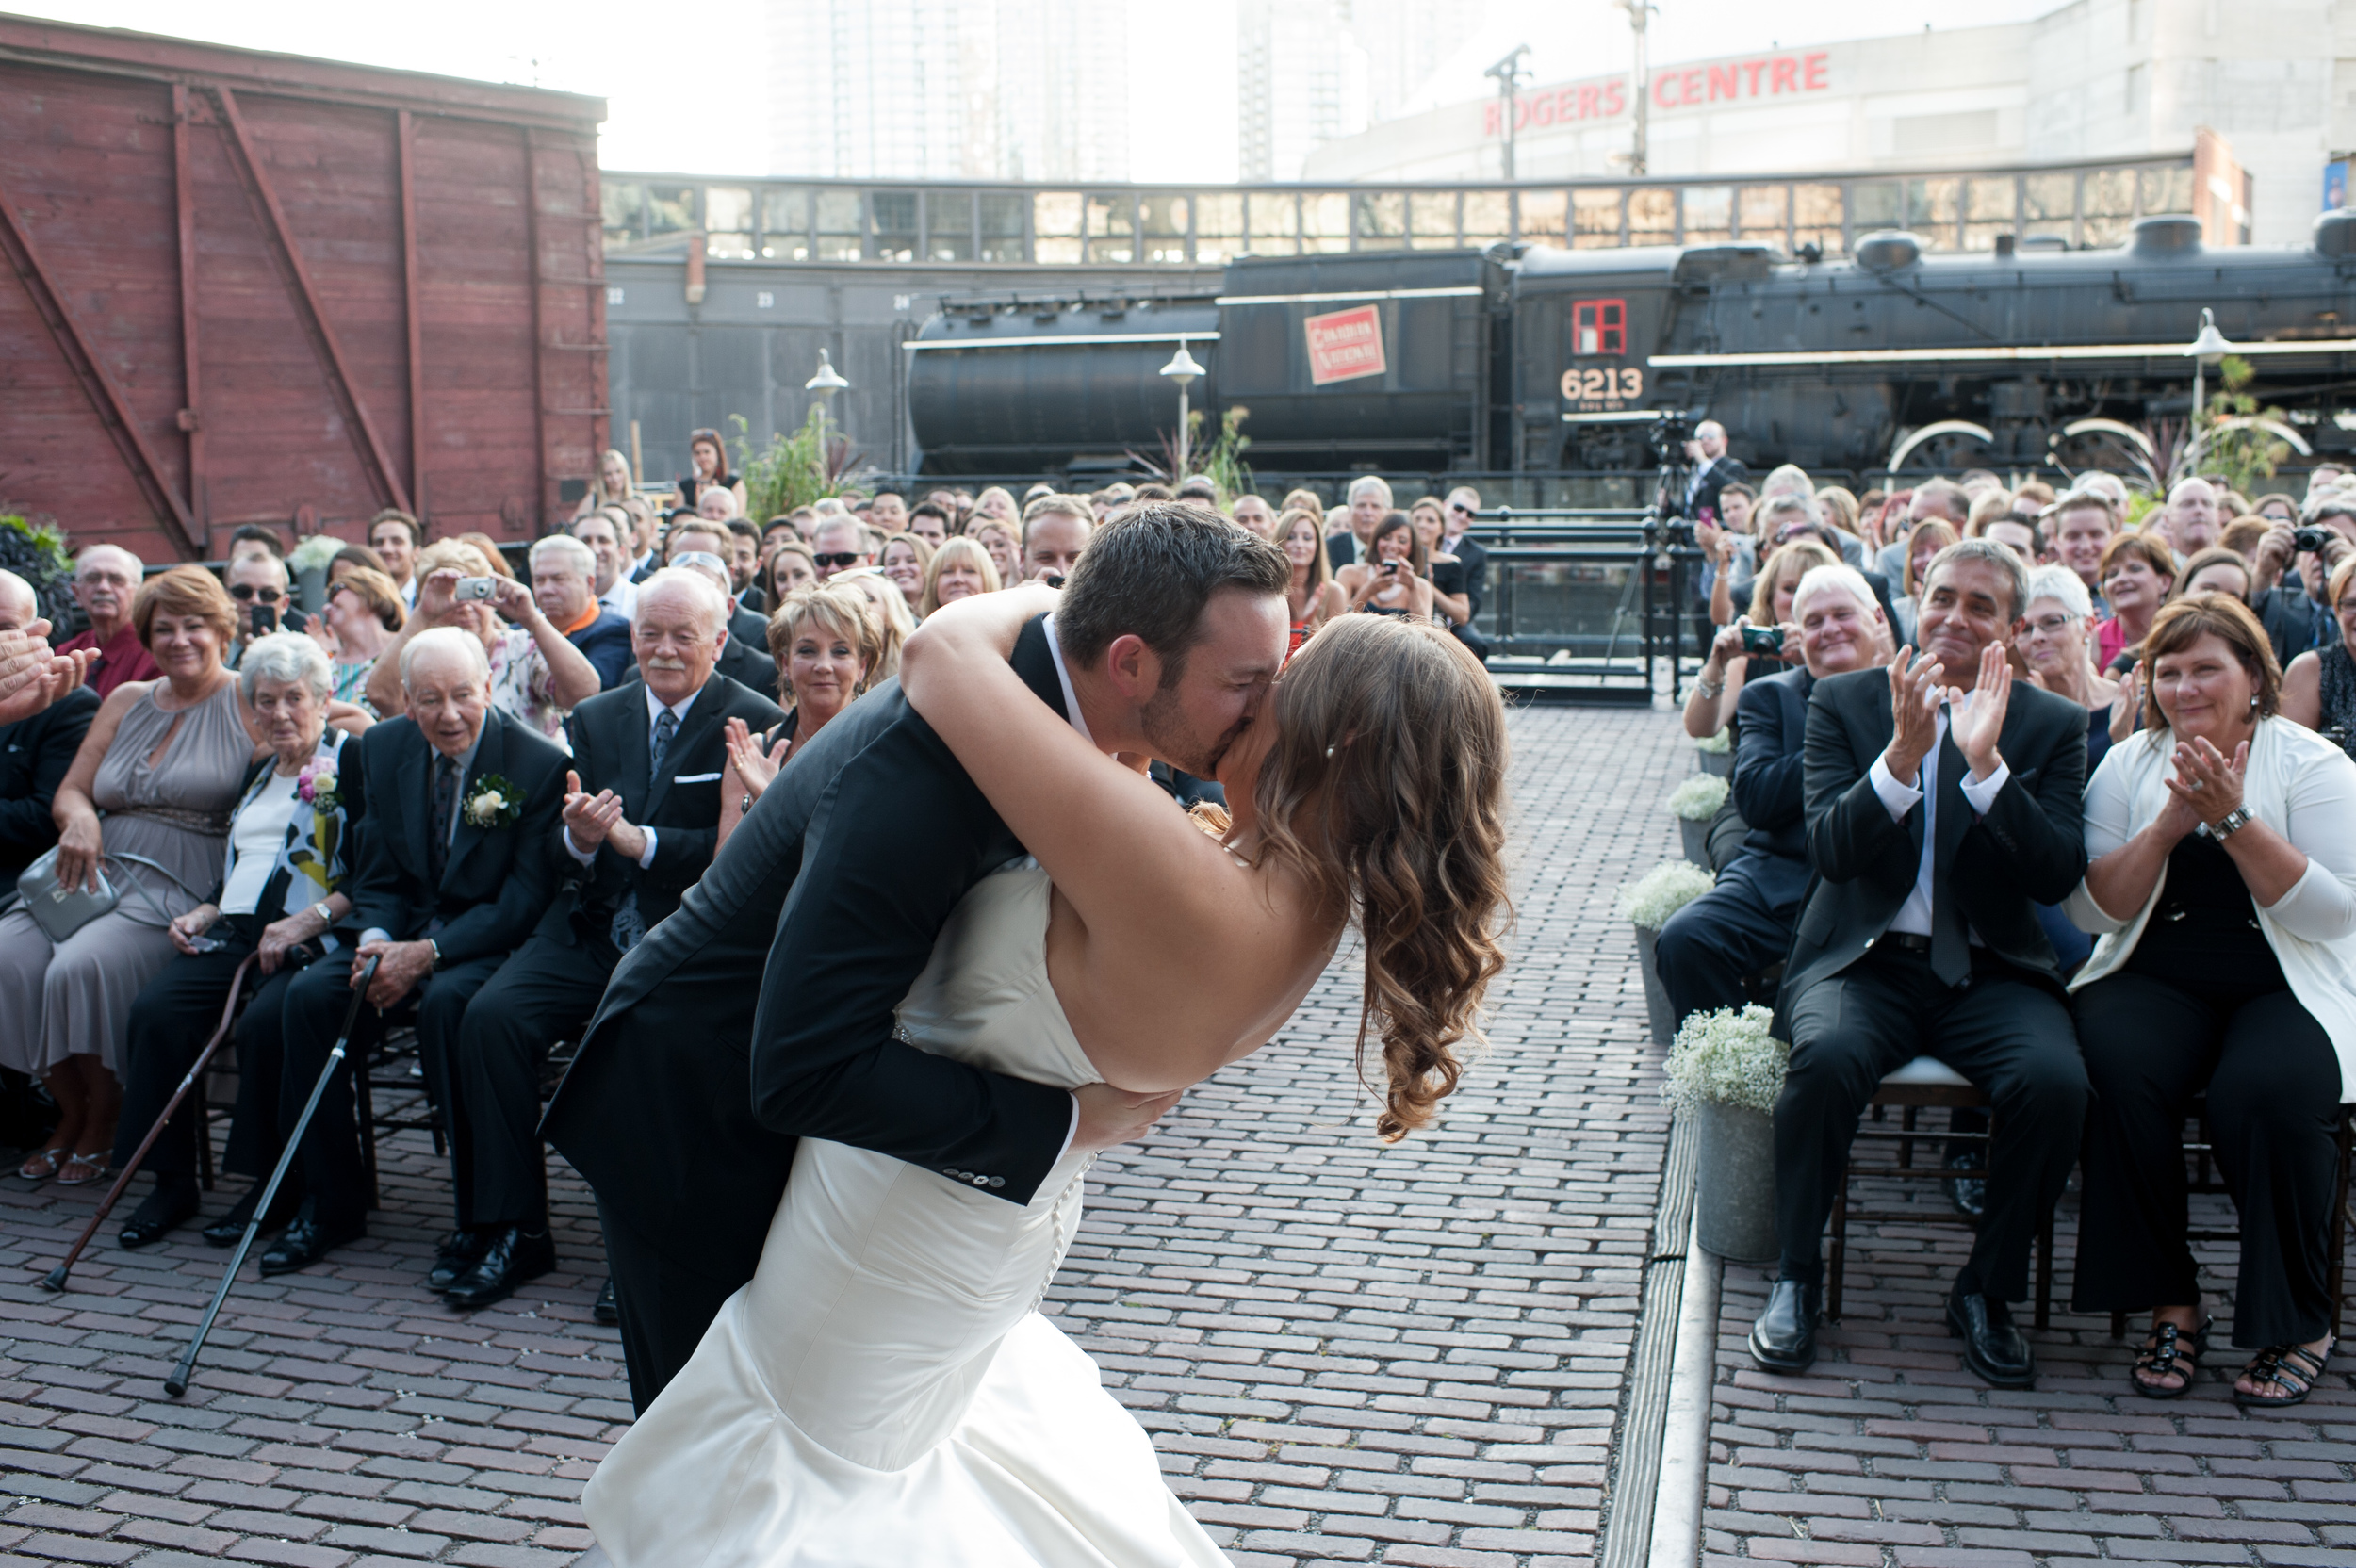 steamWhistle Brewery Wedding ceremony kiss